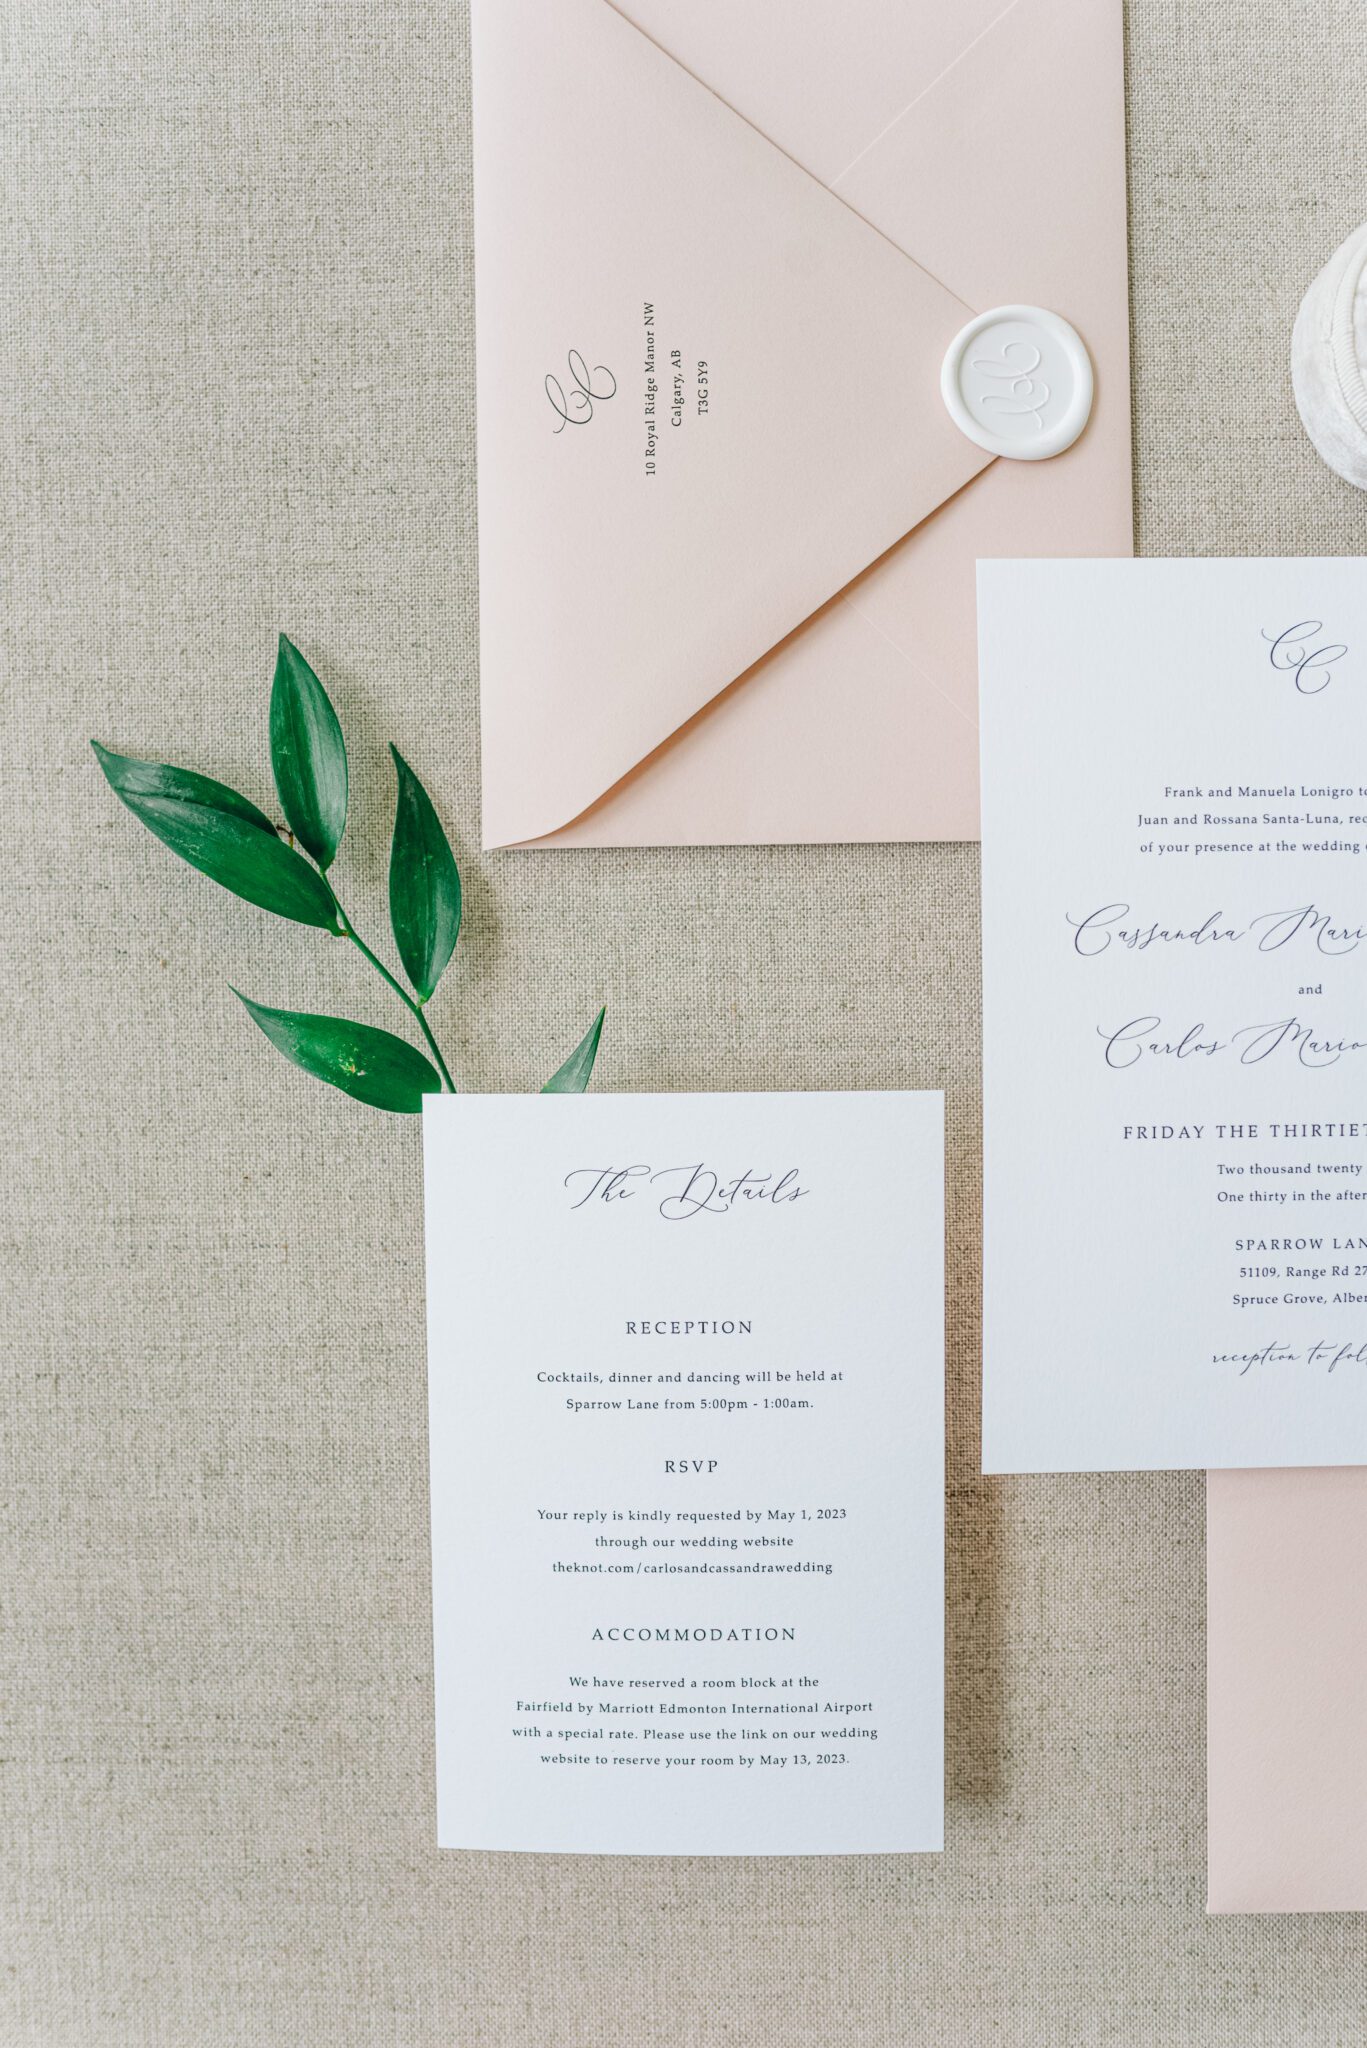 Classic and elegant white and blush wedding invitation paper suite captured by Jenny Jean Photography.
